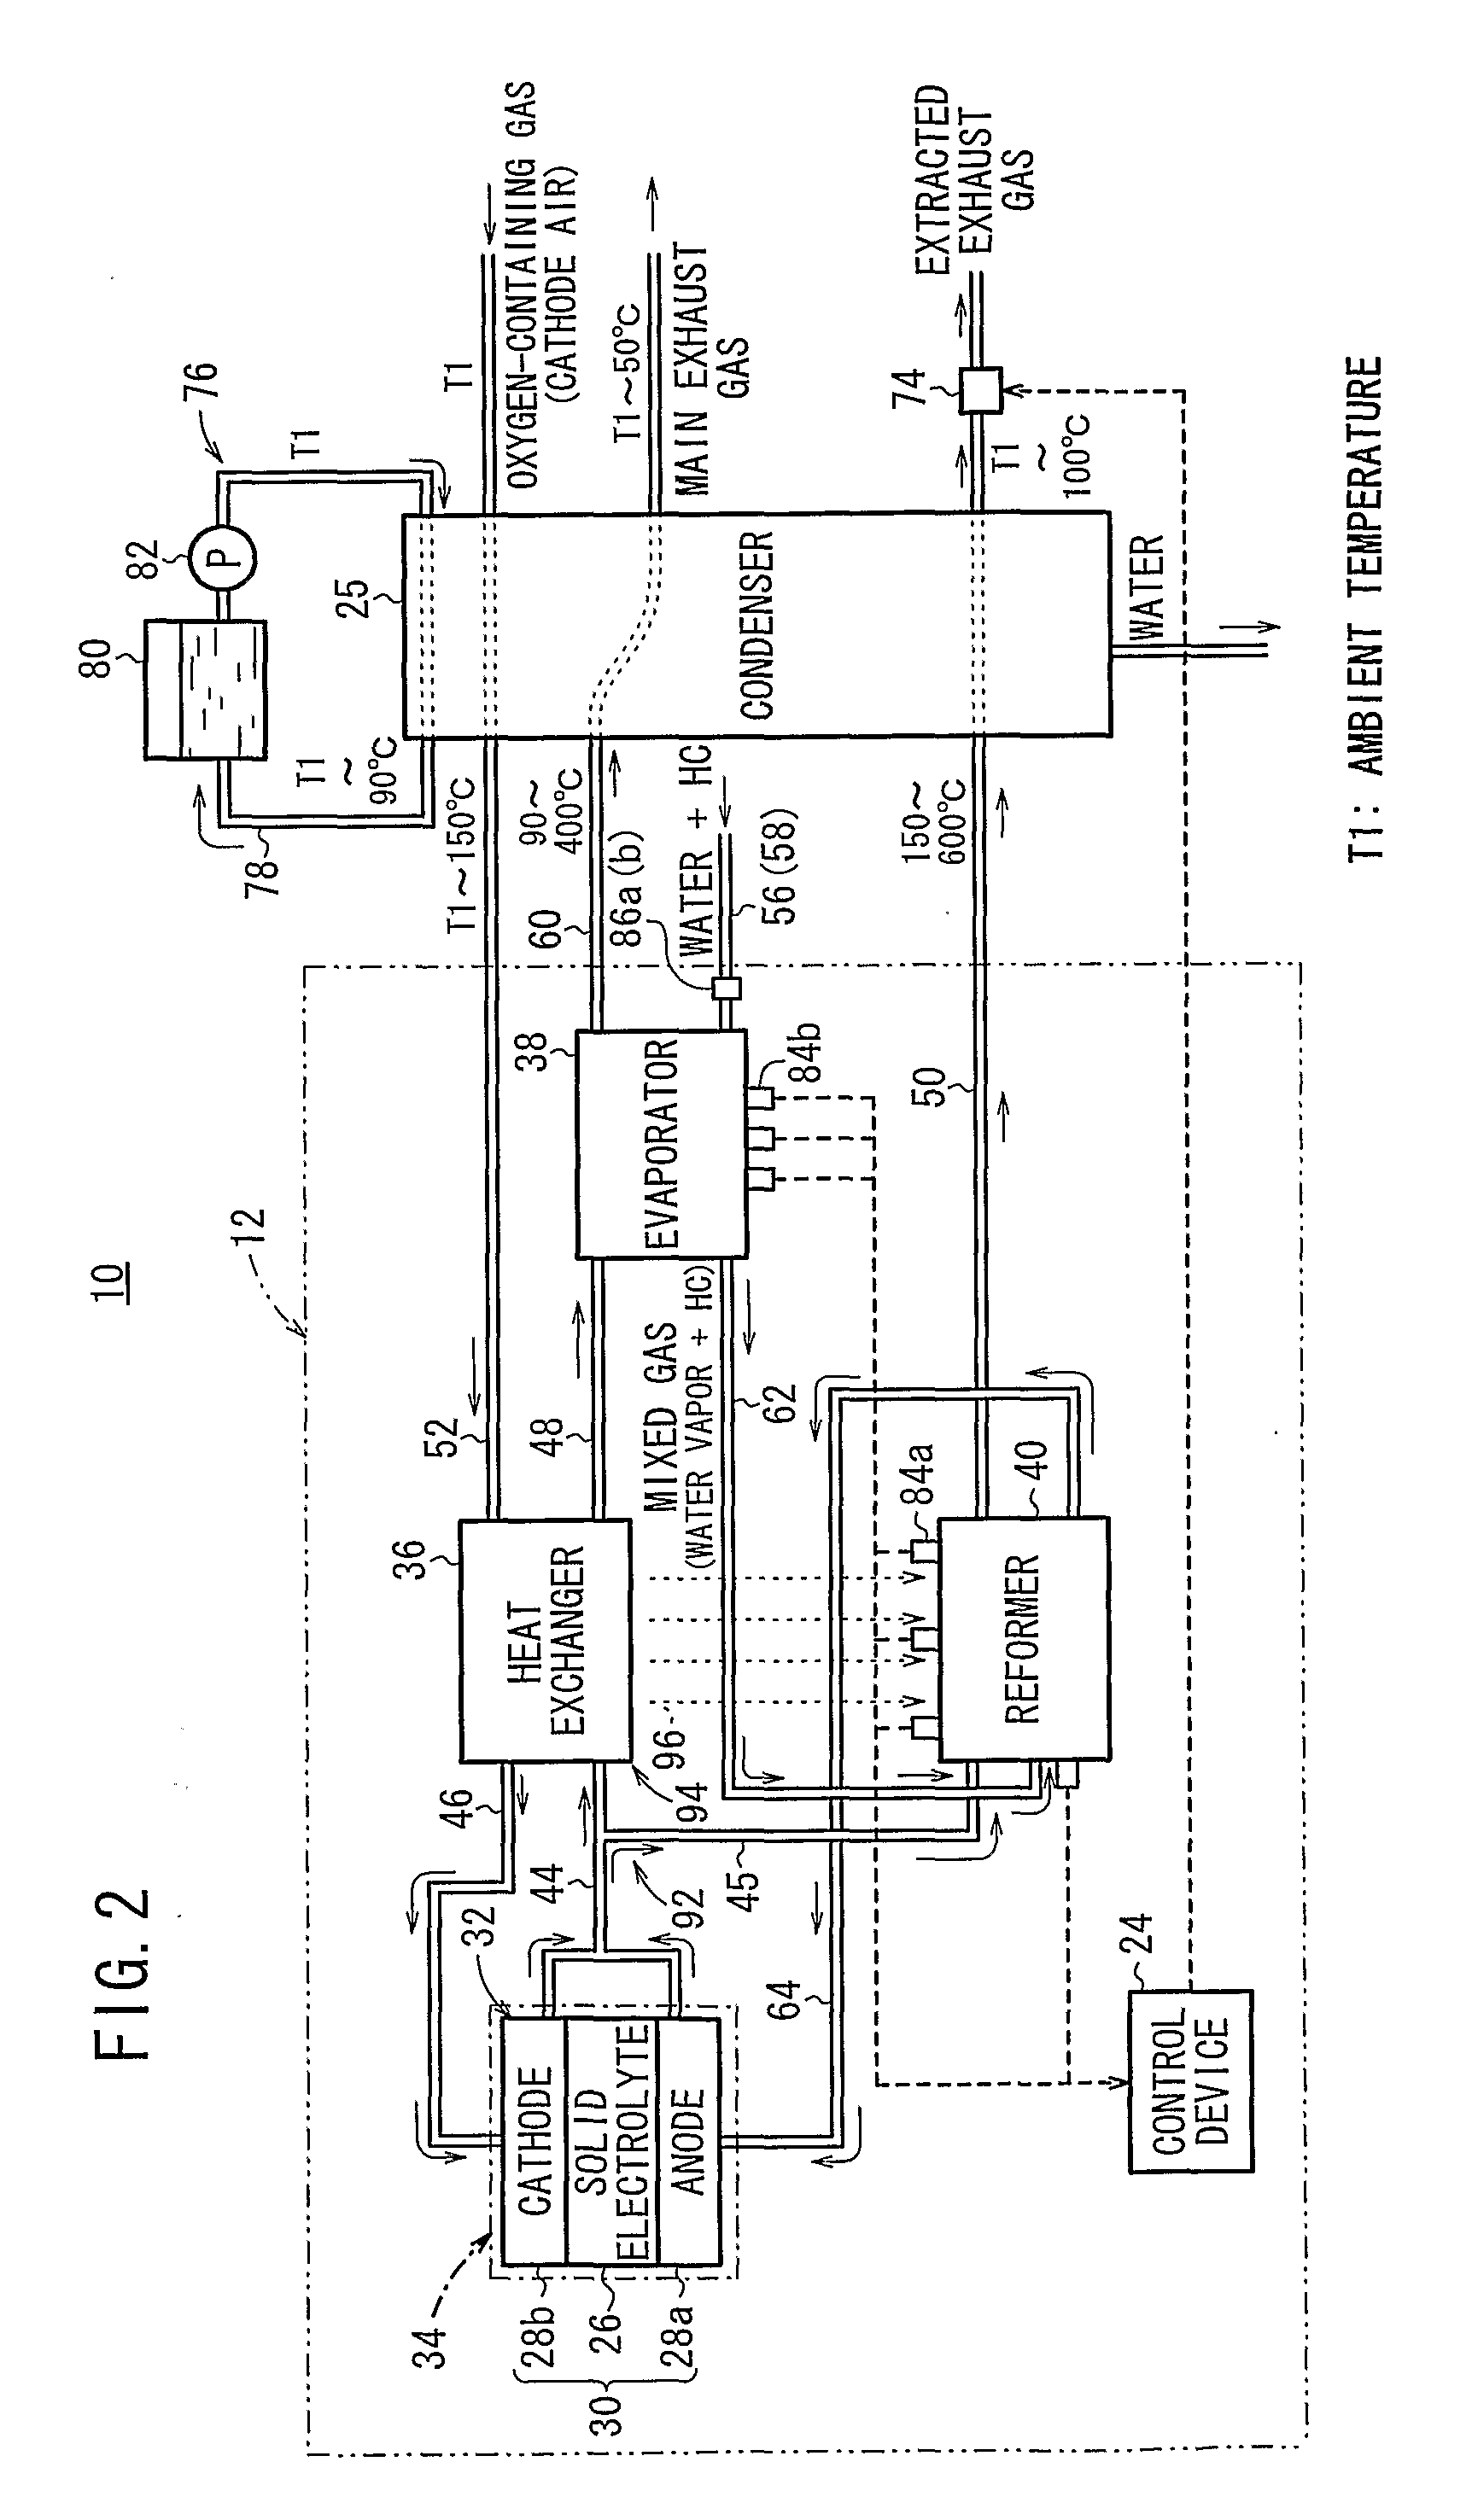 Fuel cell system and method of operating the fuel cell system